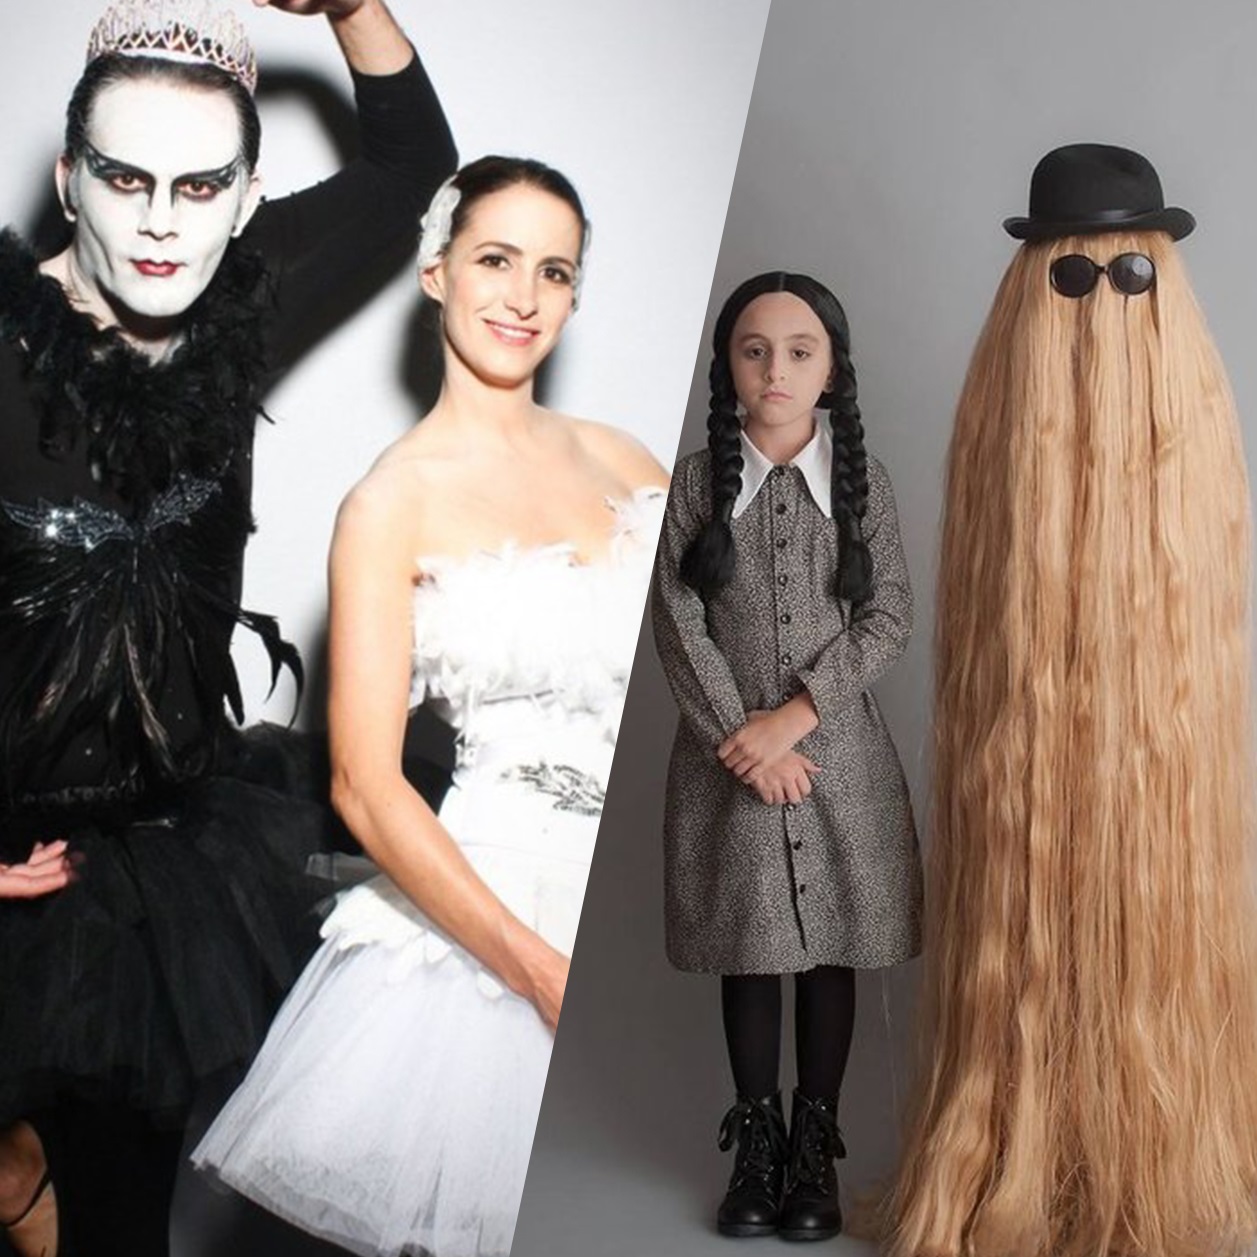 Halloween Couple Costume 2022 Our 20 Ideas In Pictures To 49 Off